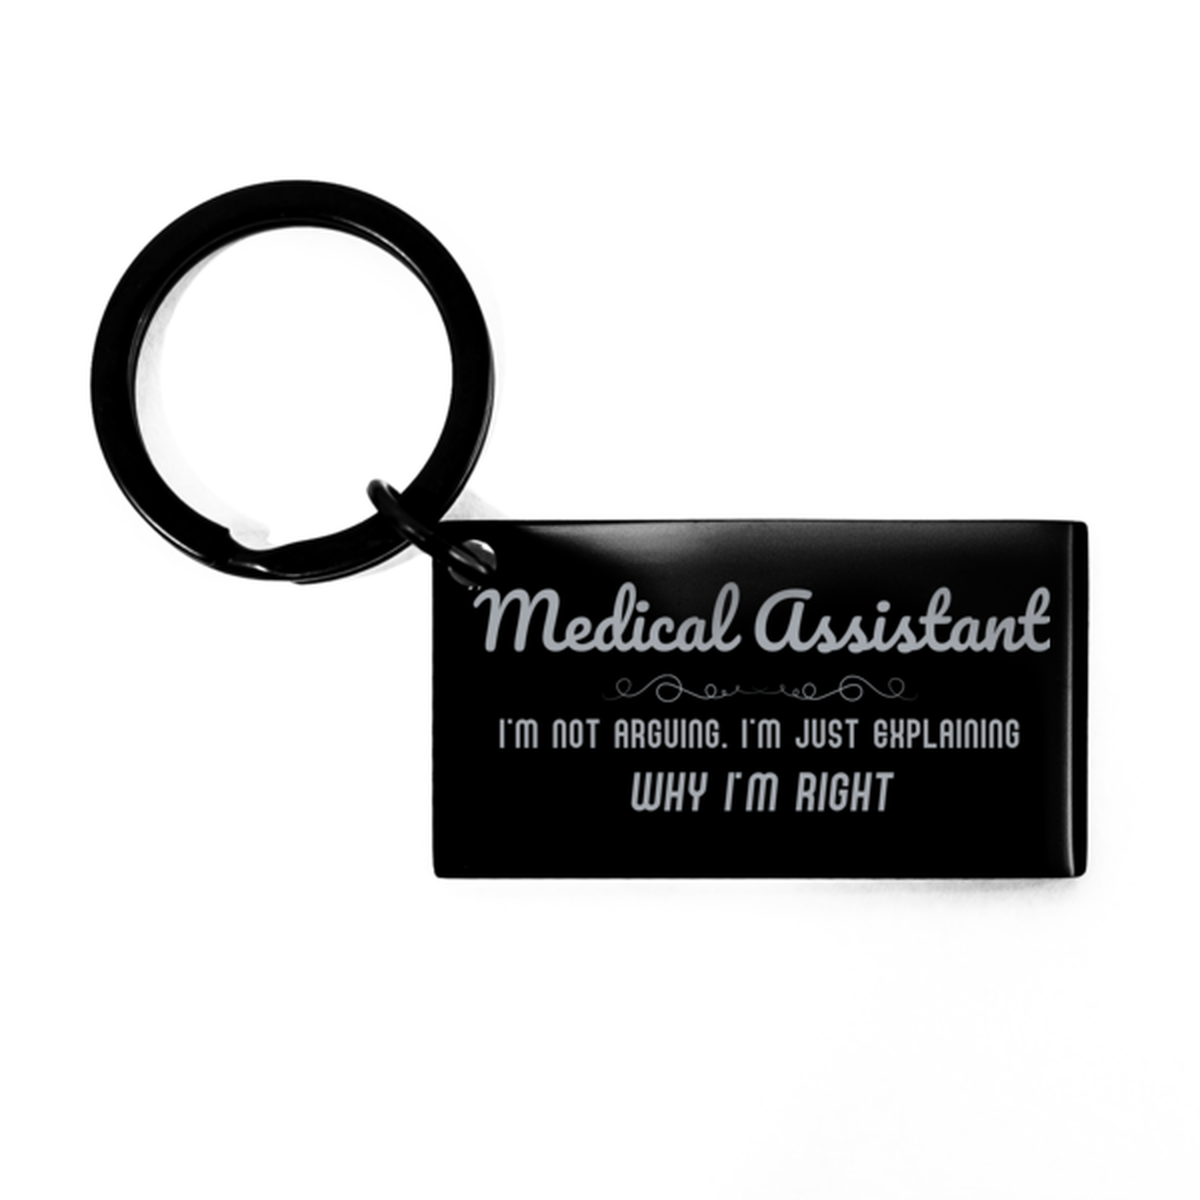 Medical Assistant I'm not Arguing. I'm Just Explaining Why I'm RIGHT Keychain, Funny Saying Quote Medical Assistant Gifts For Medical Assistant Graduation Birthday Christmas Gifts for Men Women Coworker